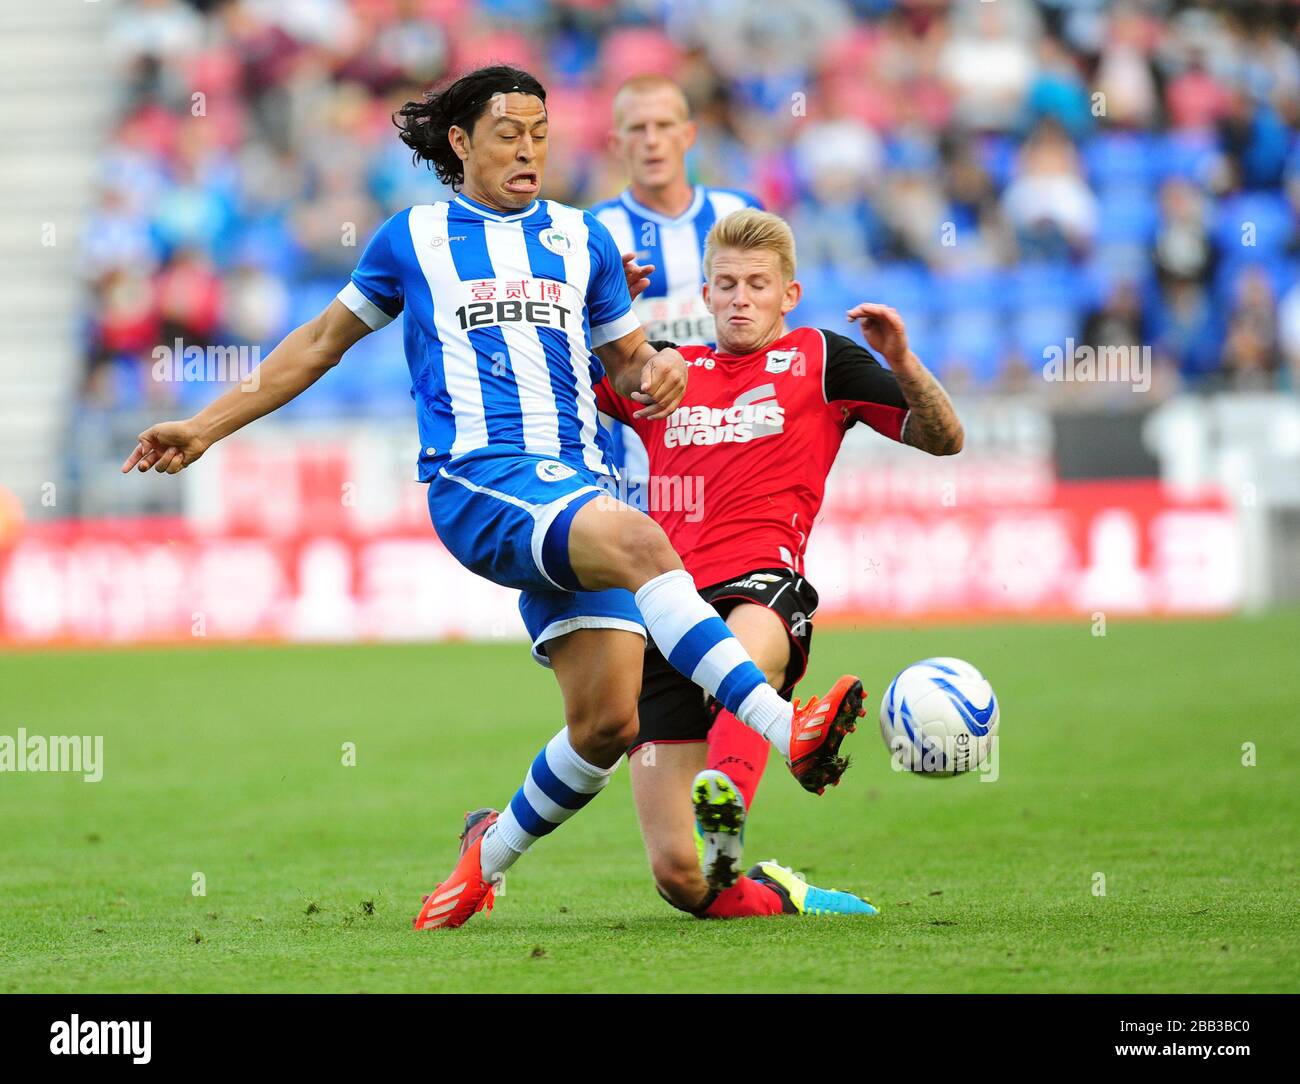 Wigan Athletic's Roger Espinoza (left) and Ipswich Town's Luke Hyam battle for the ball Stock Photo